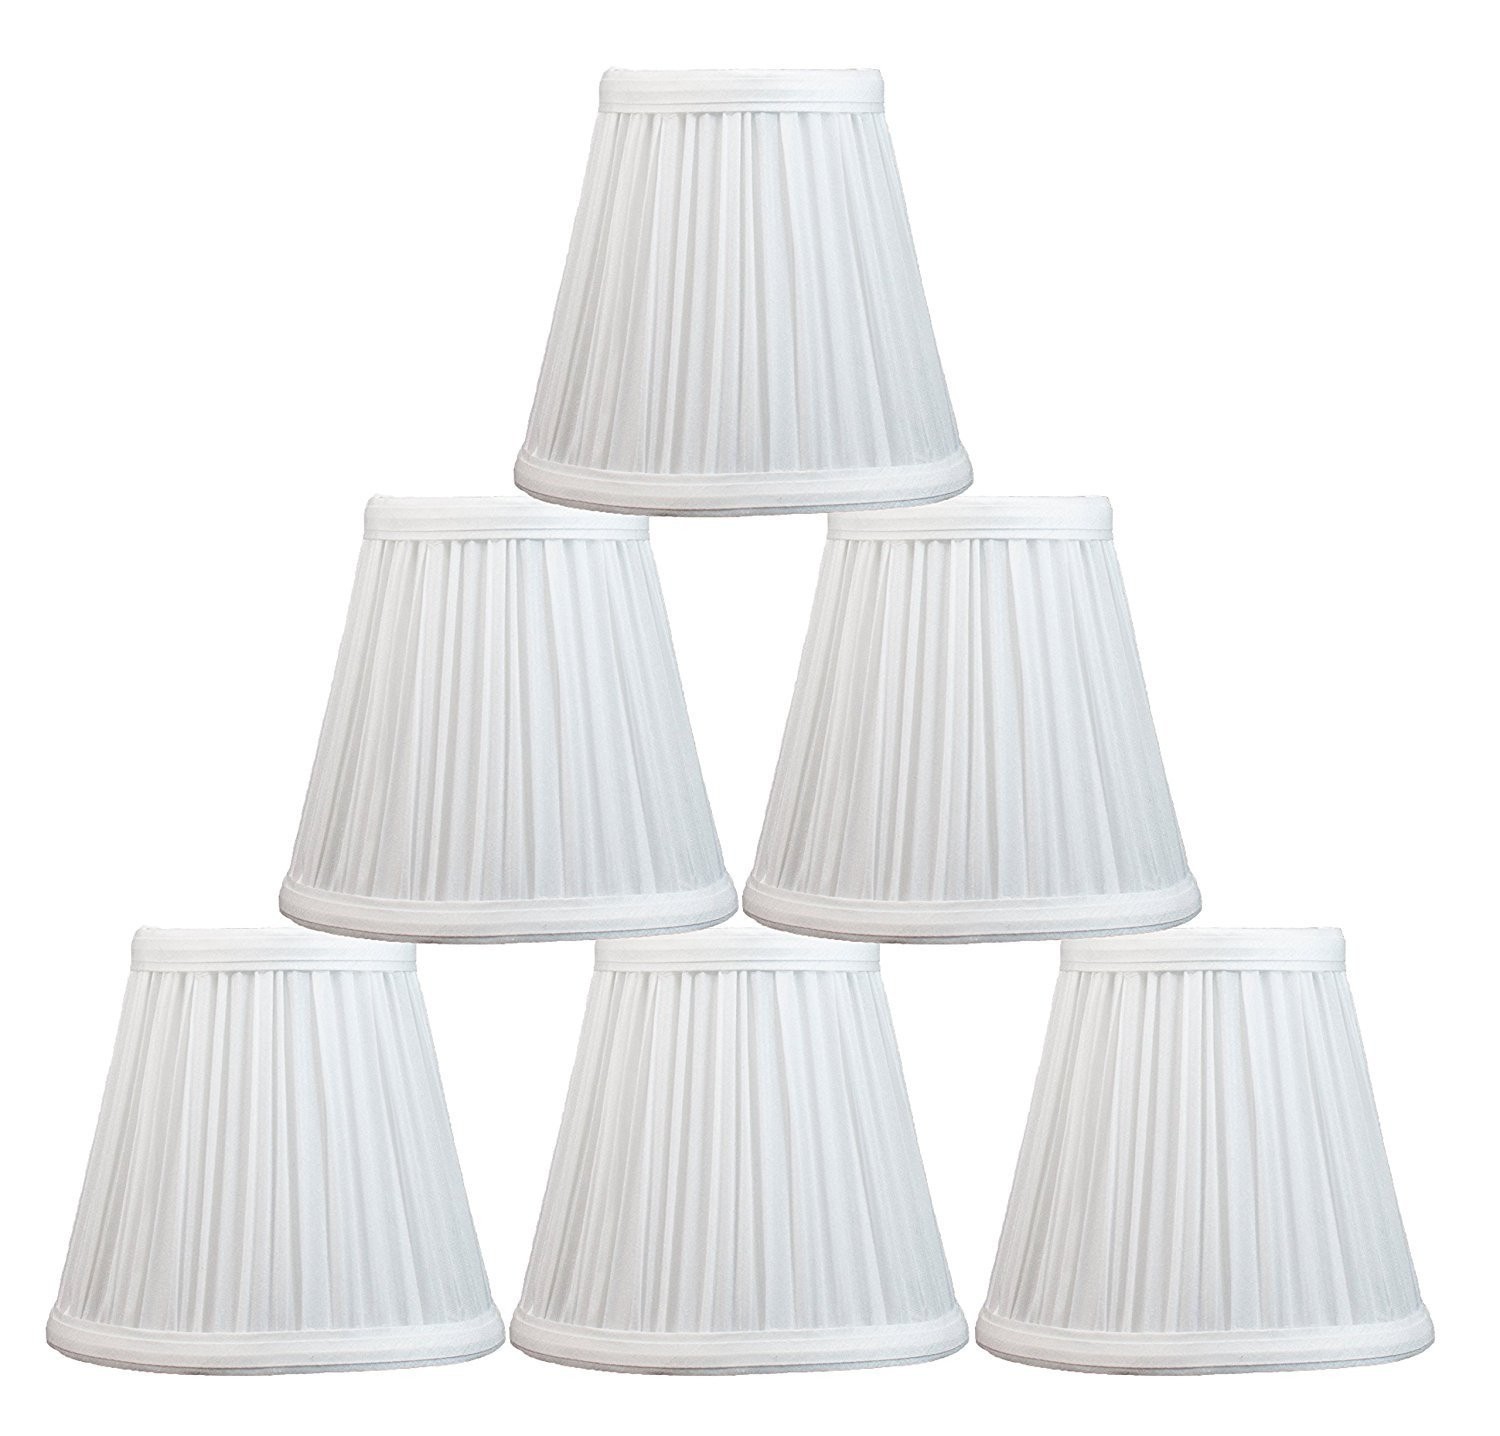 Mushroom pleated 5 inch chandelier lamp shade 6 colors